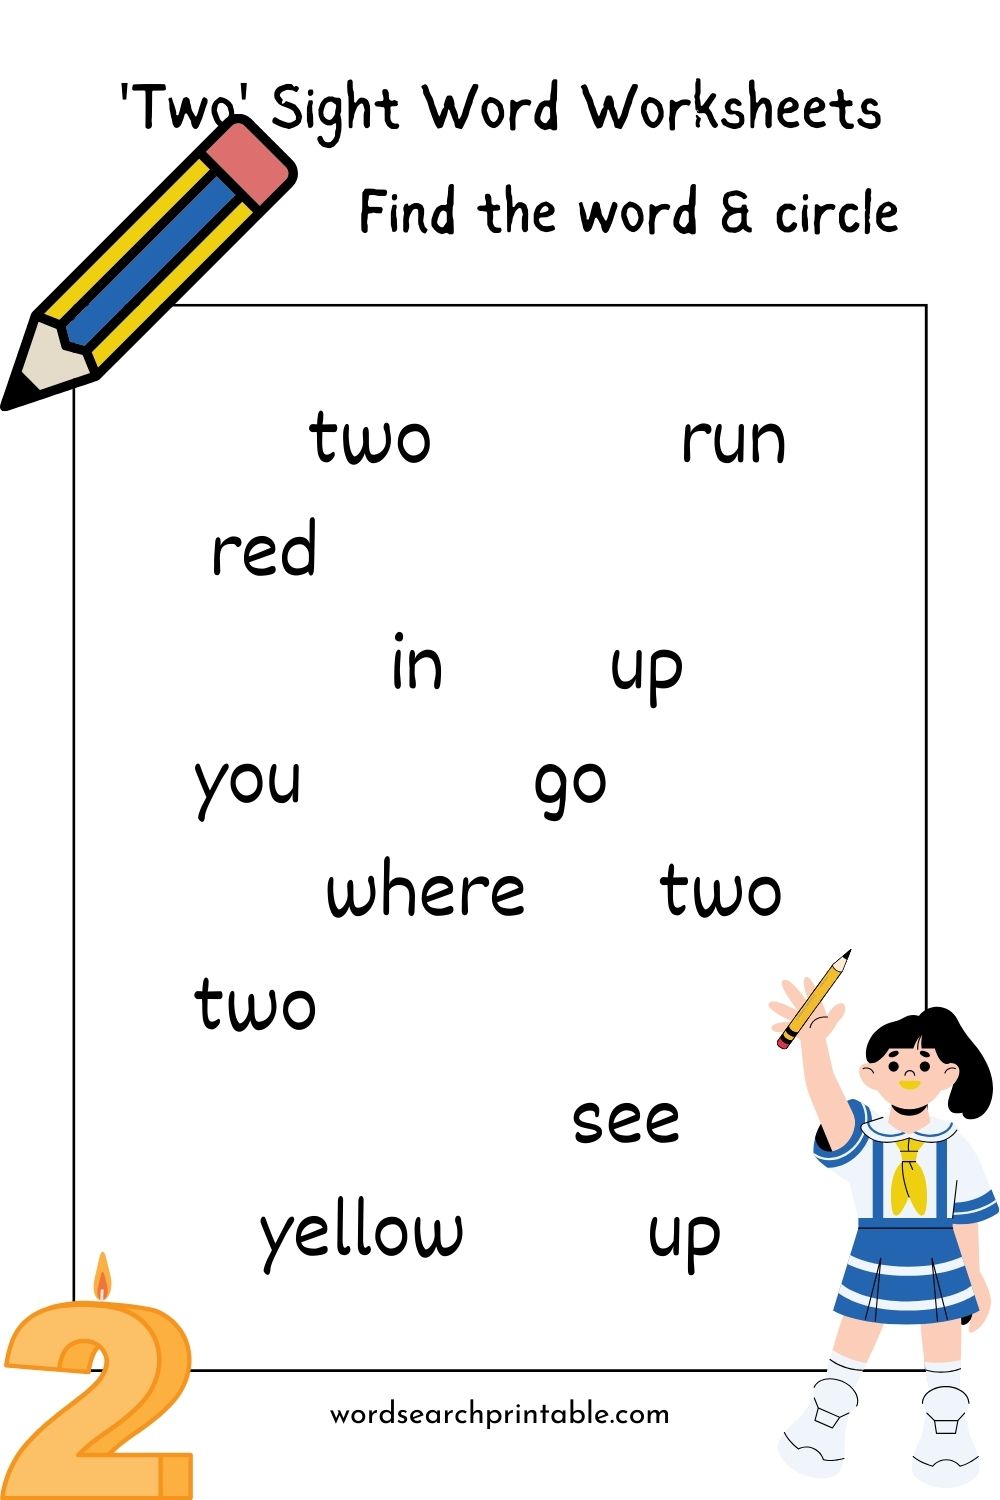 Find the sight word Two and circle it - Sight word 'Two' word hunt